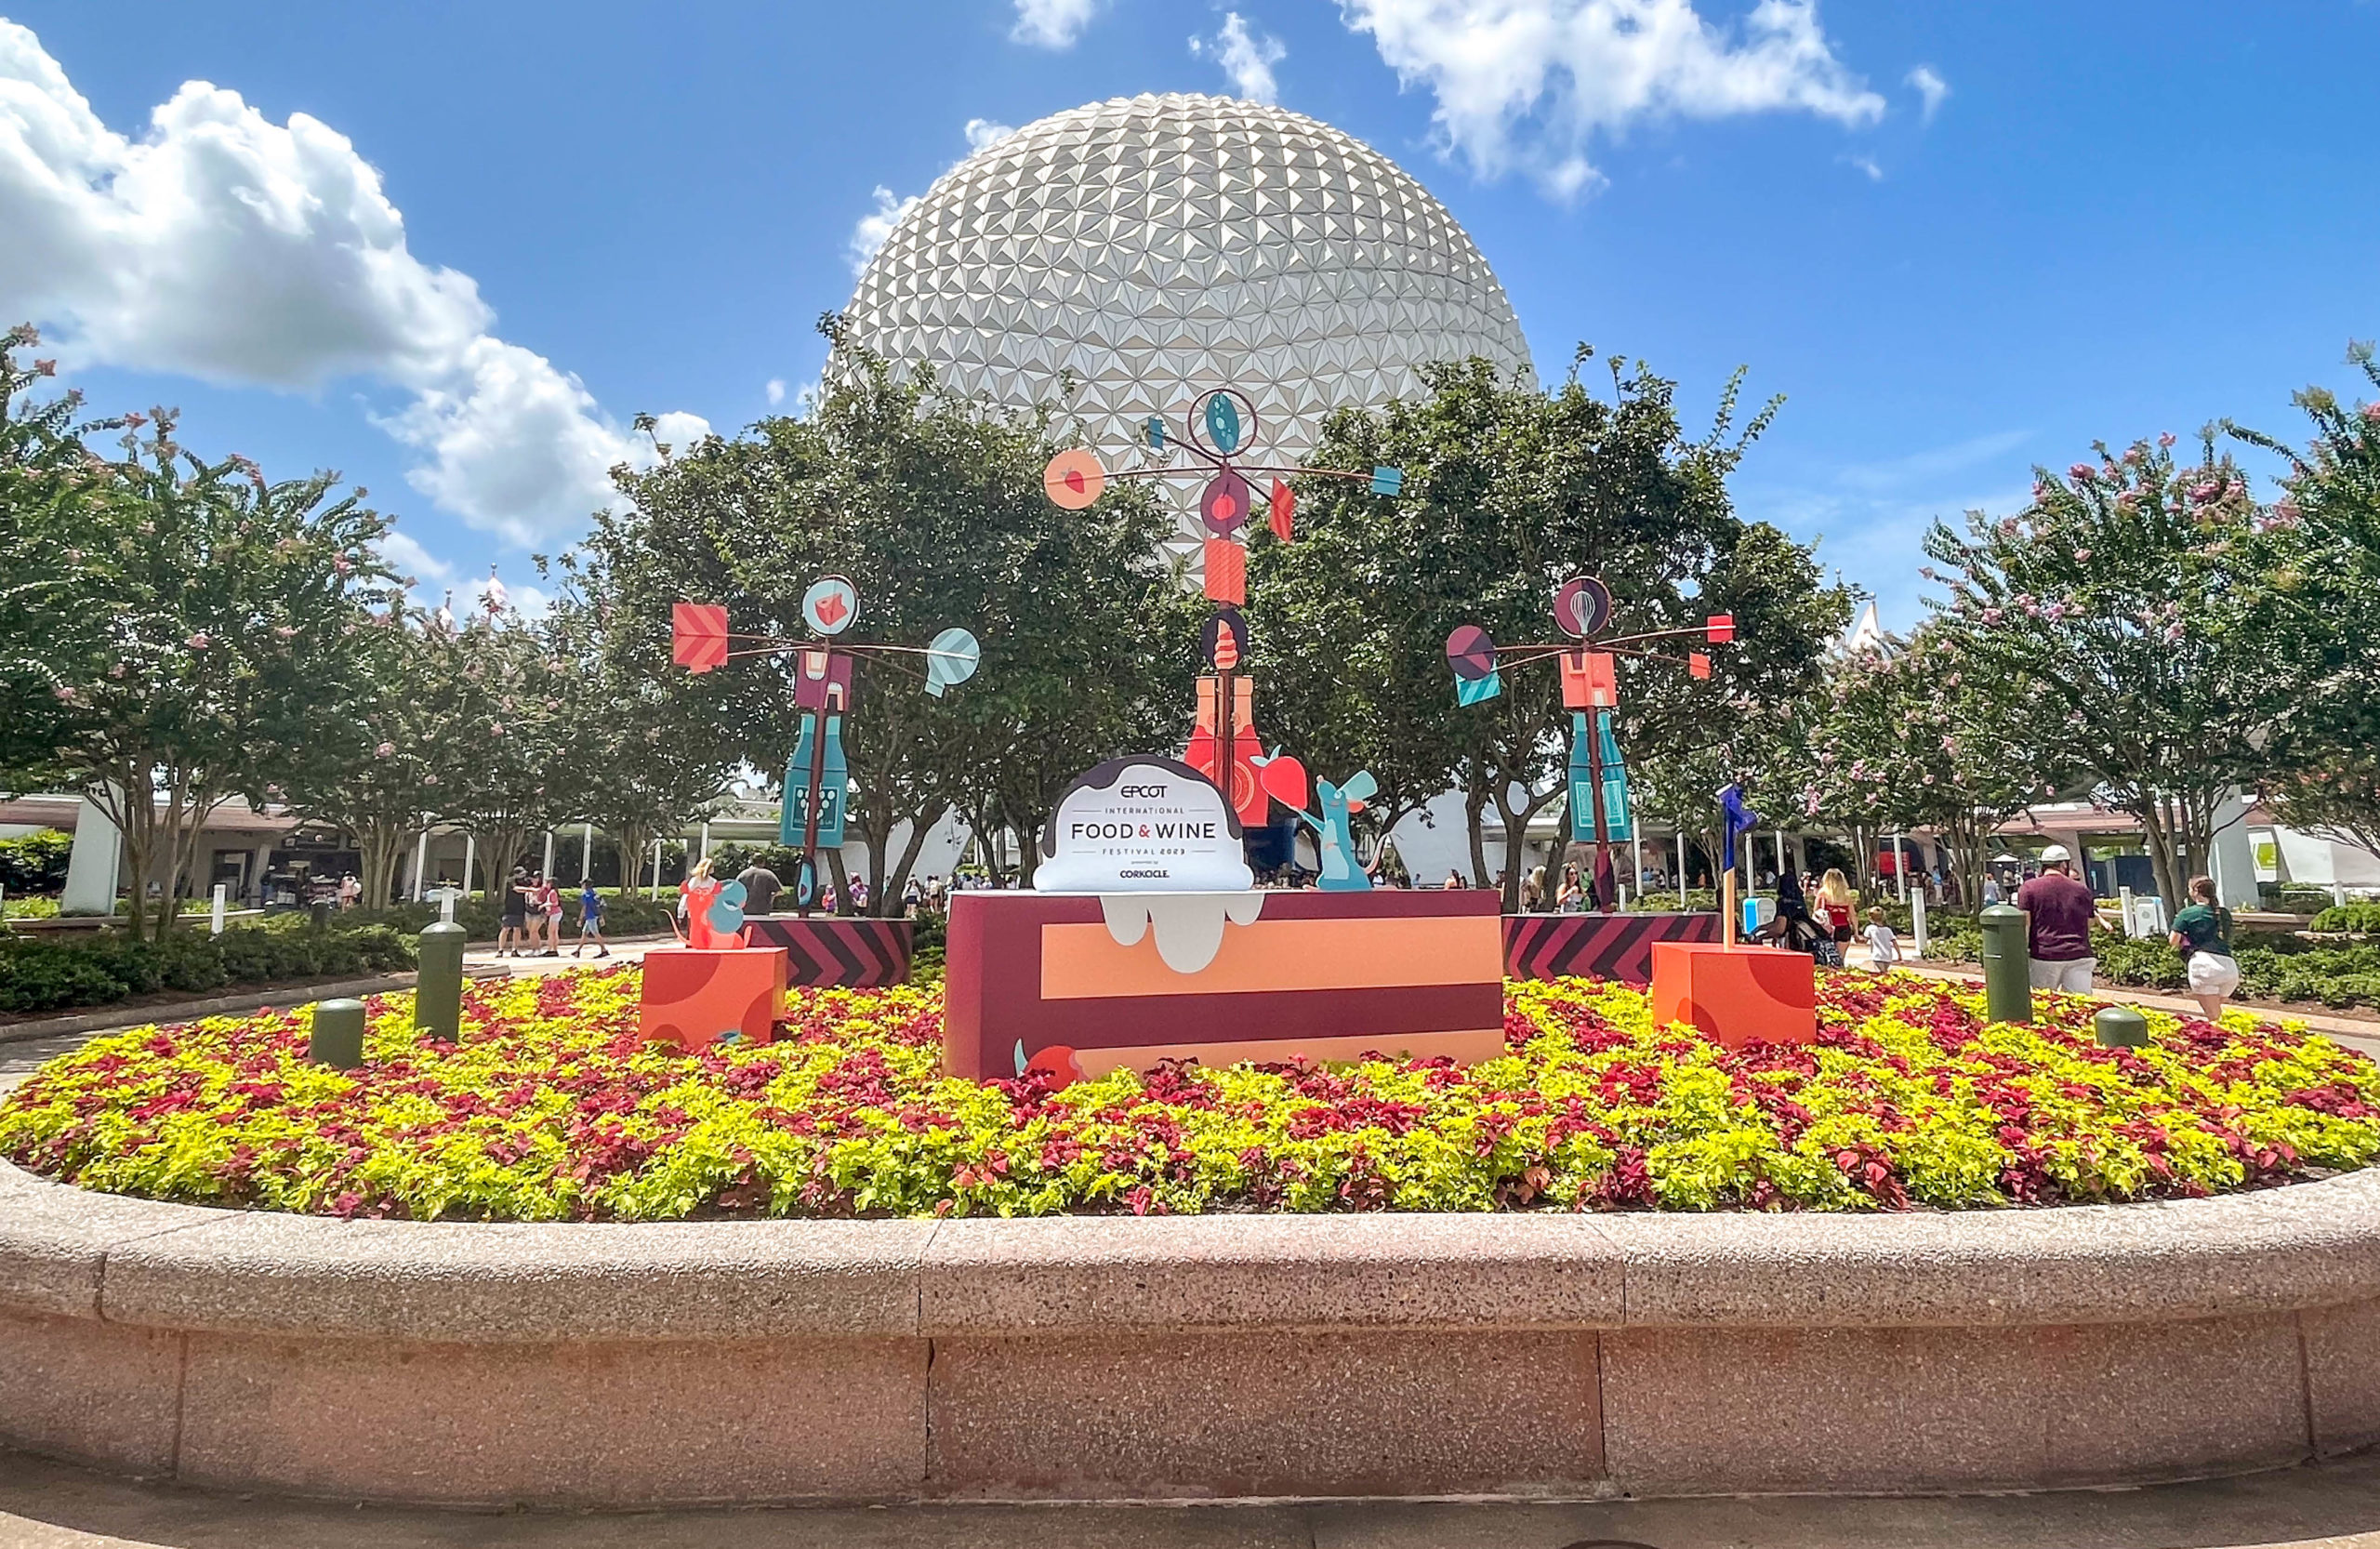 https://mickeyblog.com/wp-content/uploads/2023/07/2023-wdw-epcot-food-and-wine-festival-spaceship-earth-entrance-signs-decor-stock-2-scaled.jpg